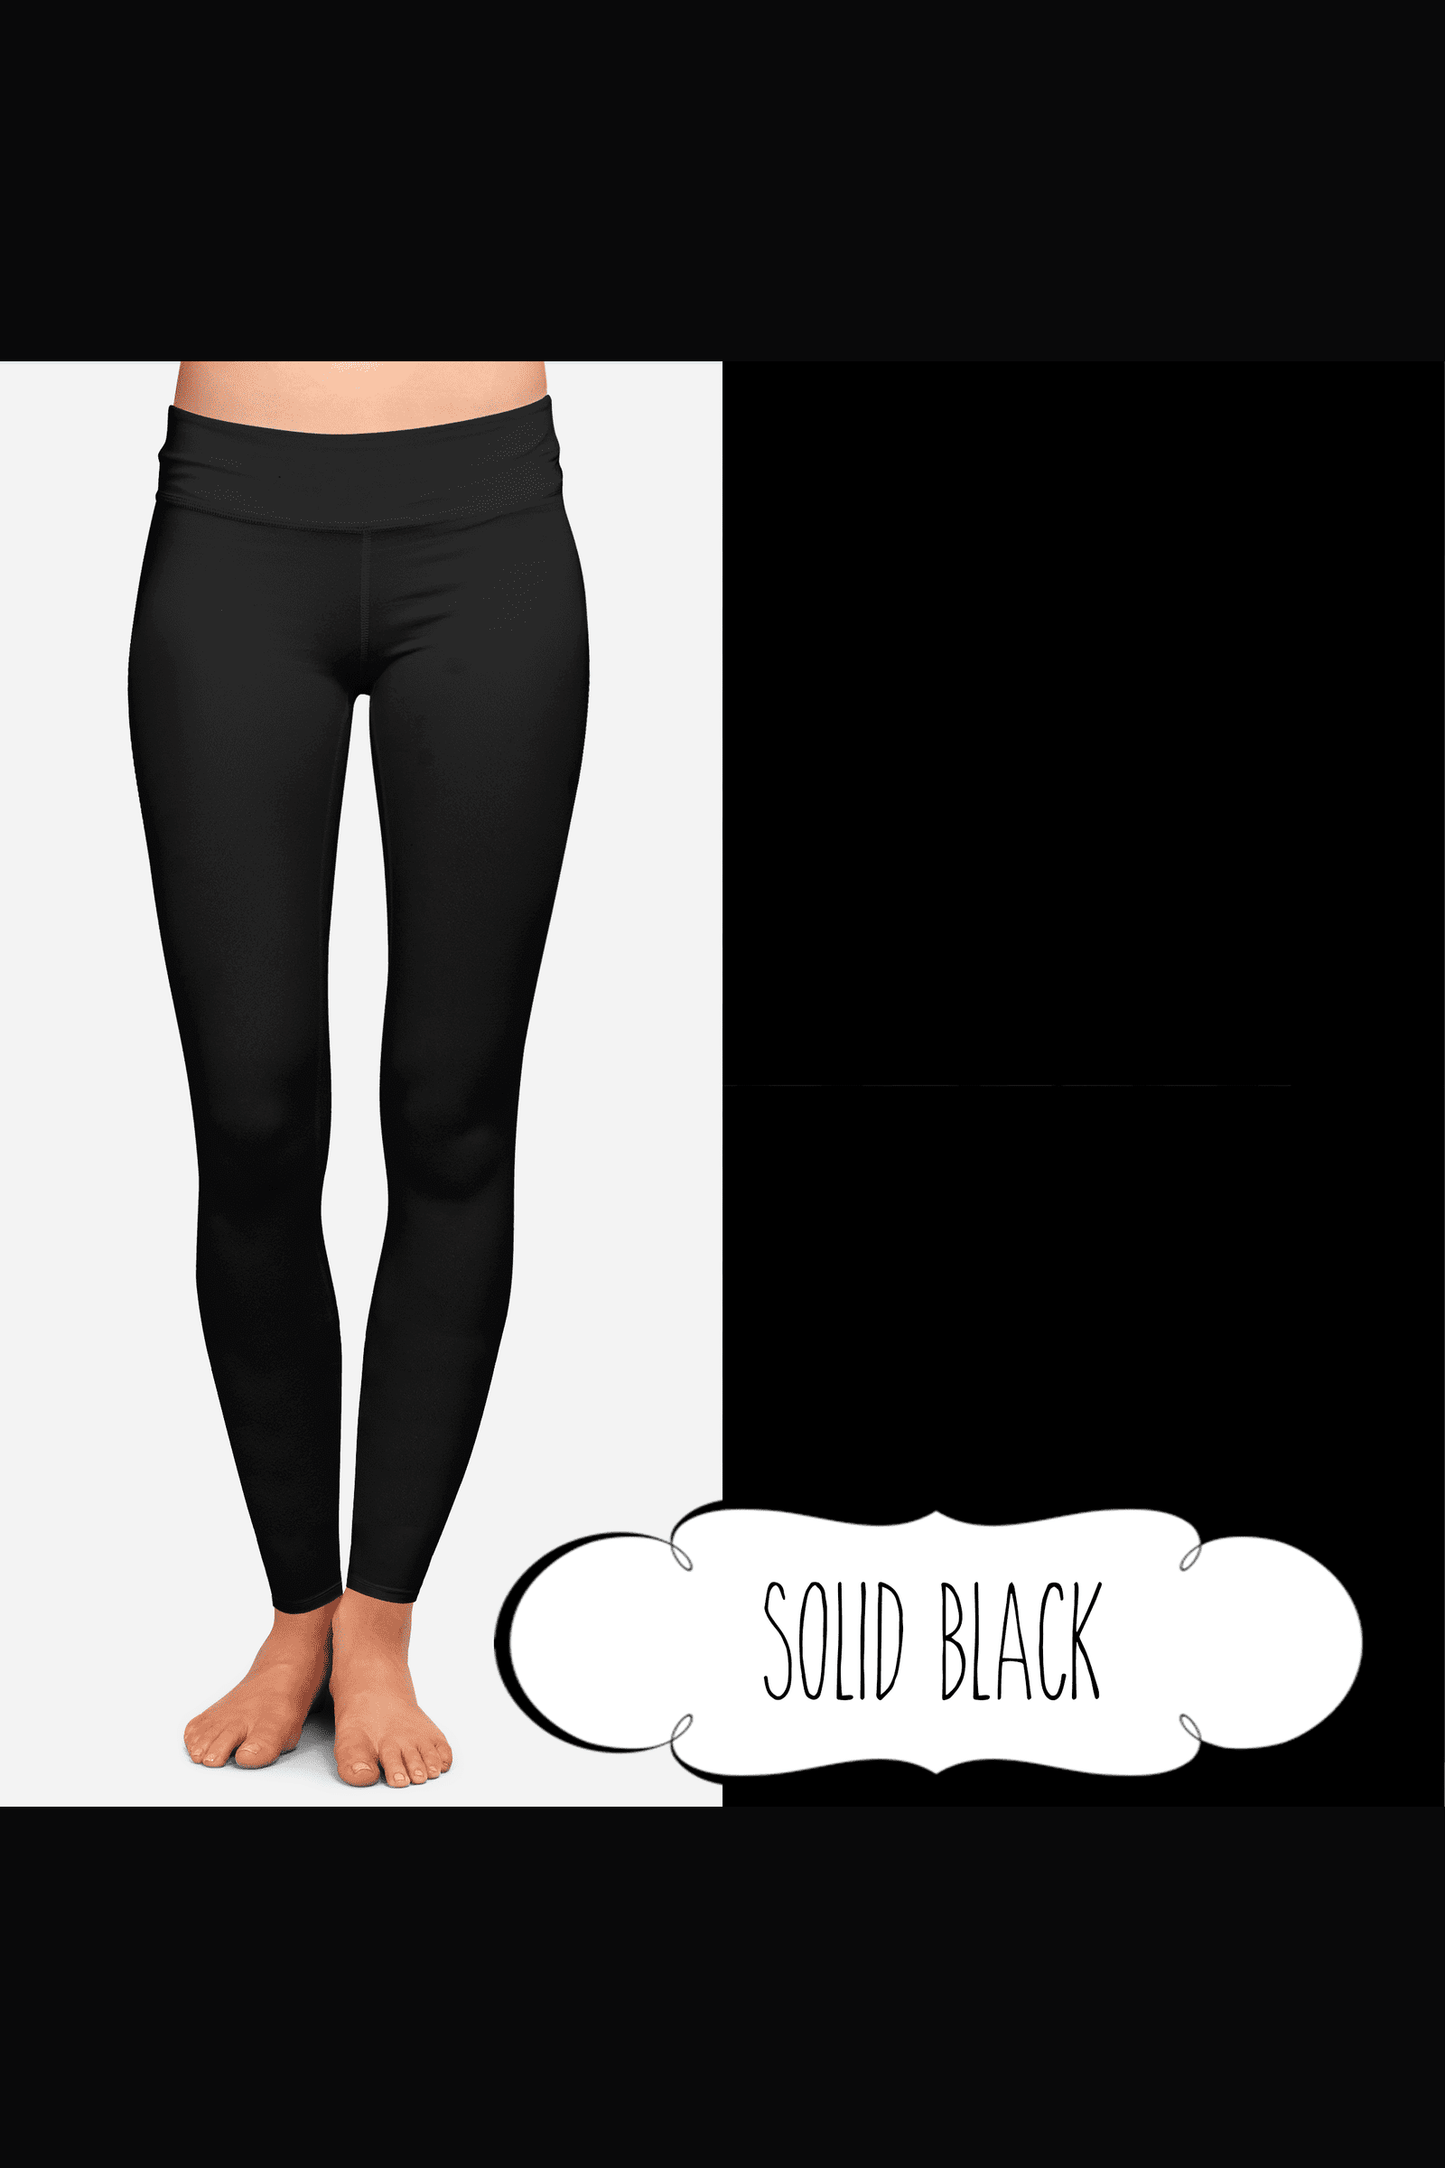 Yoga Style Leggings - Solid Black by Eleven & Co.